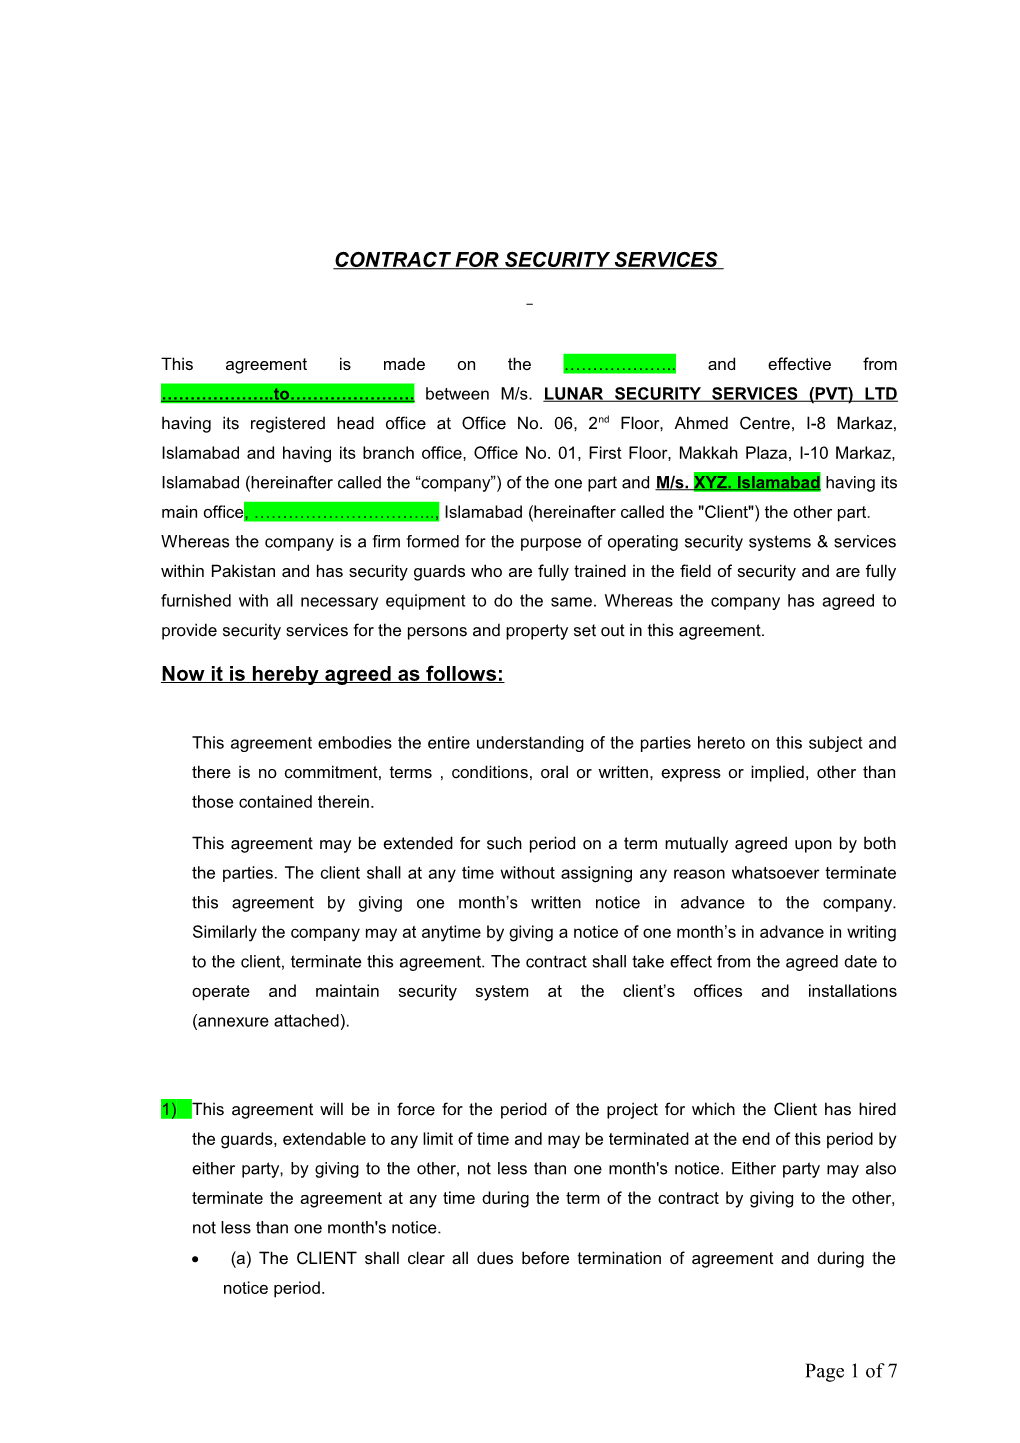 Contract for Security Services